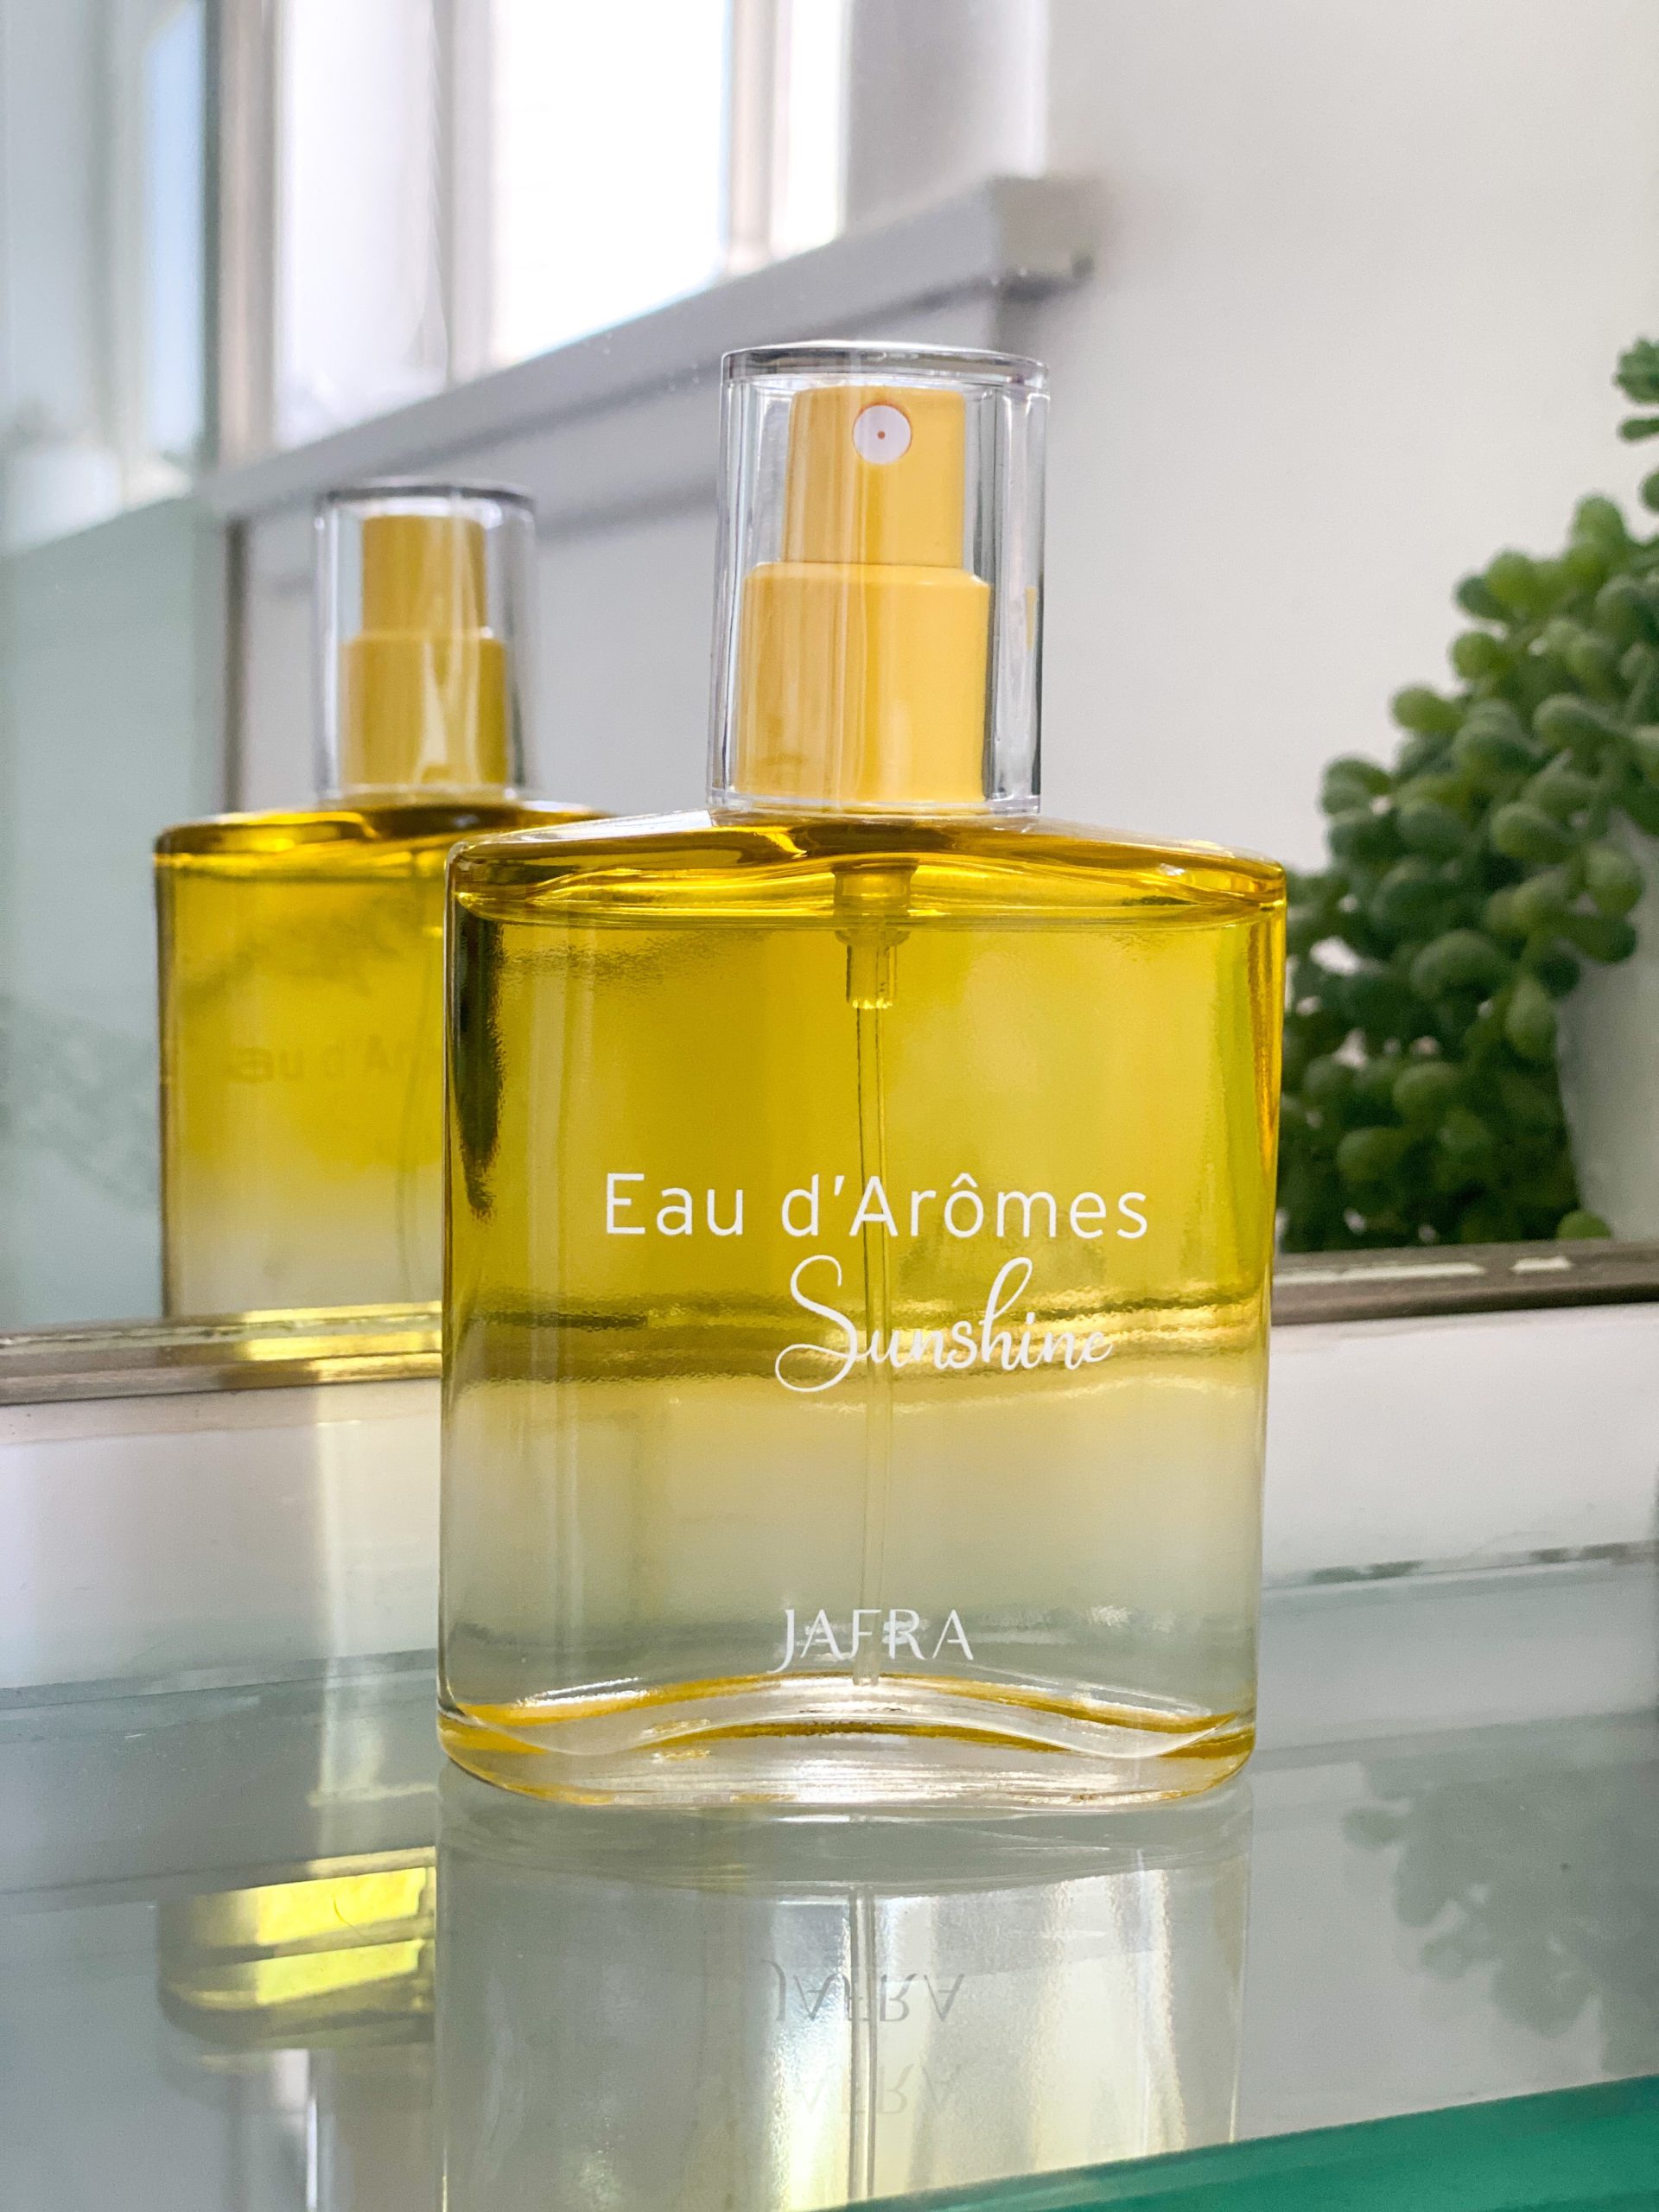 Fragrance That Brings the Sunshine photographed in the bathroom